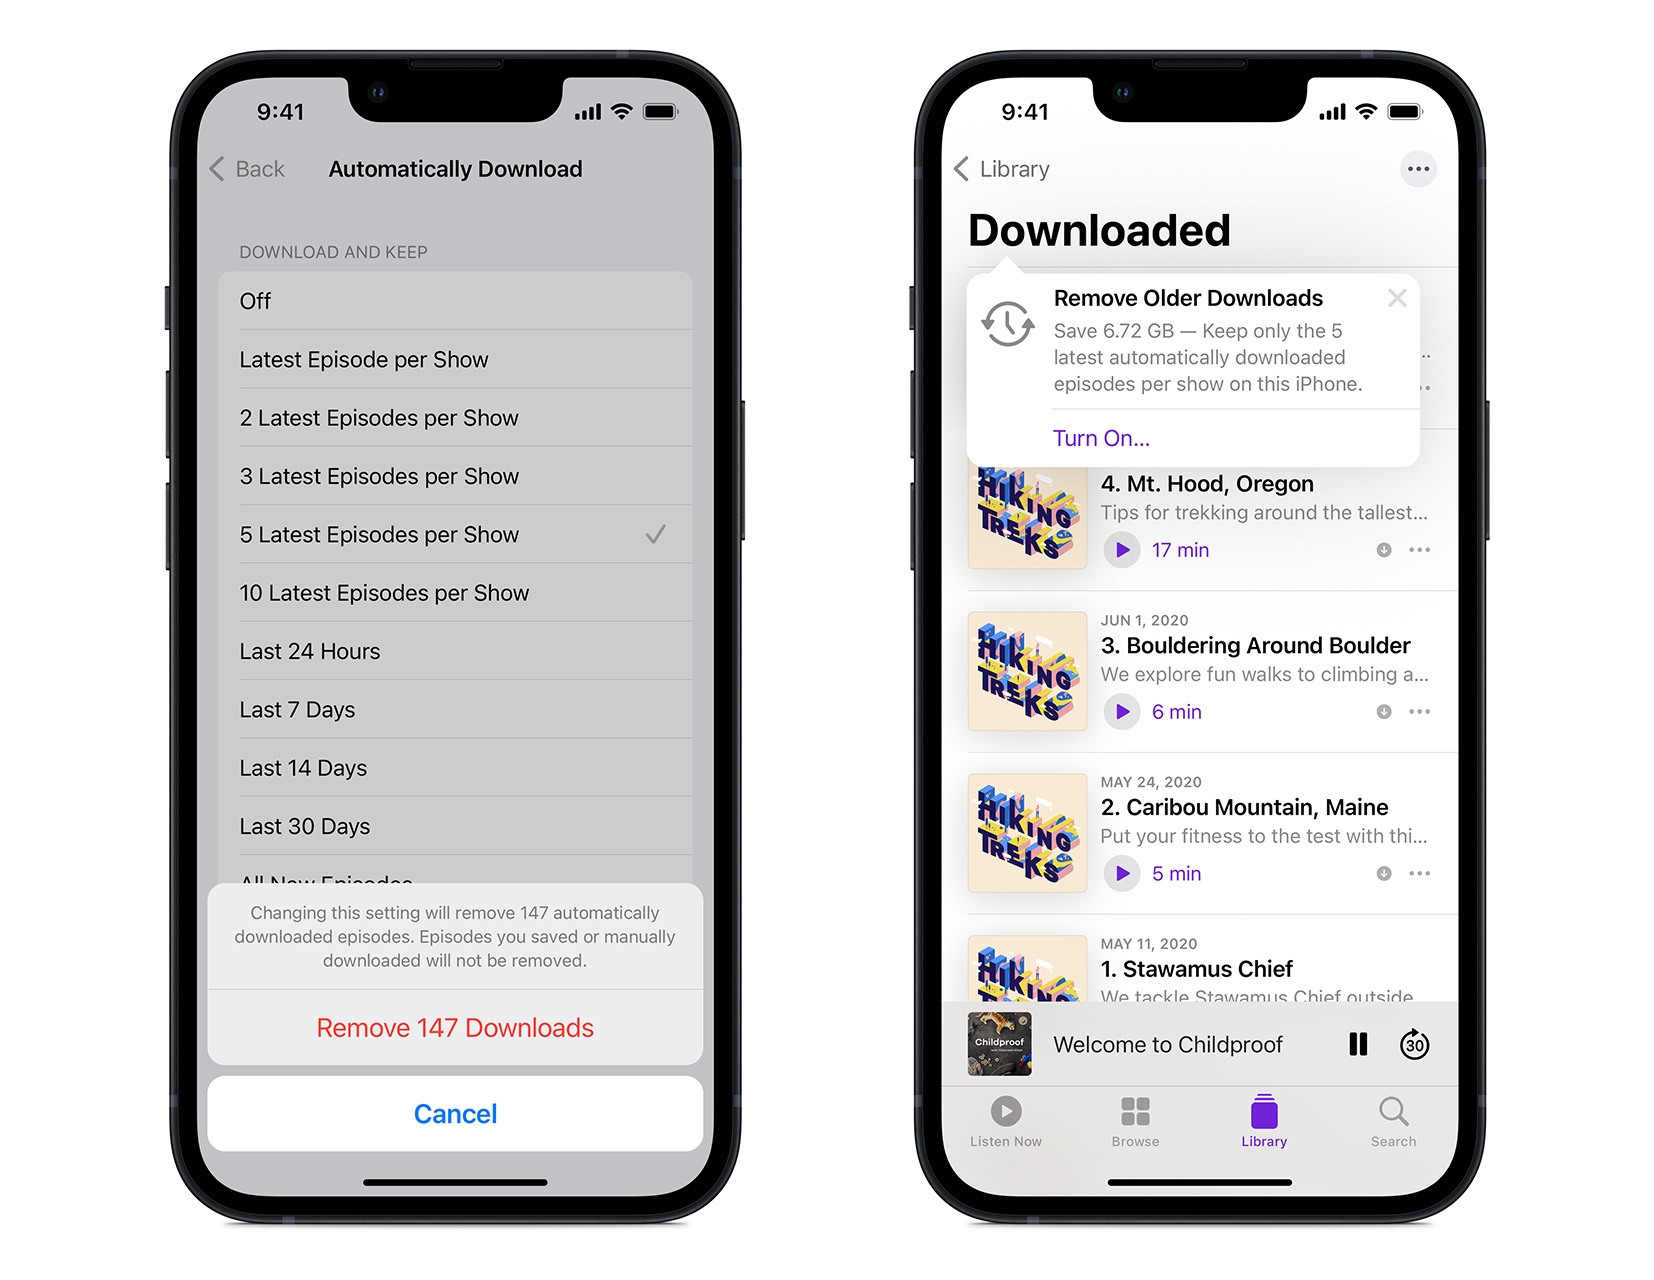 Apple Podcasts will manage episode downloads to save storage space | DeviceDaily.com